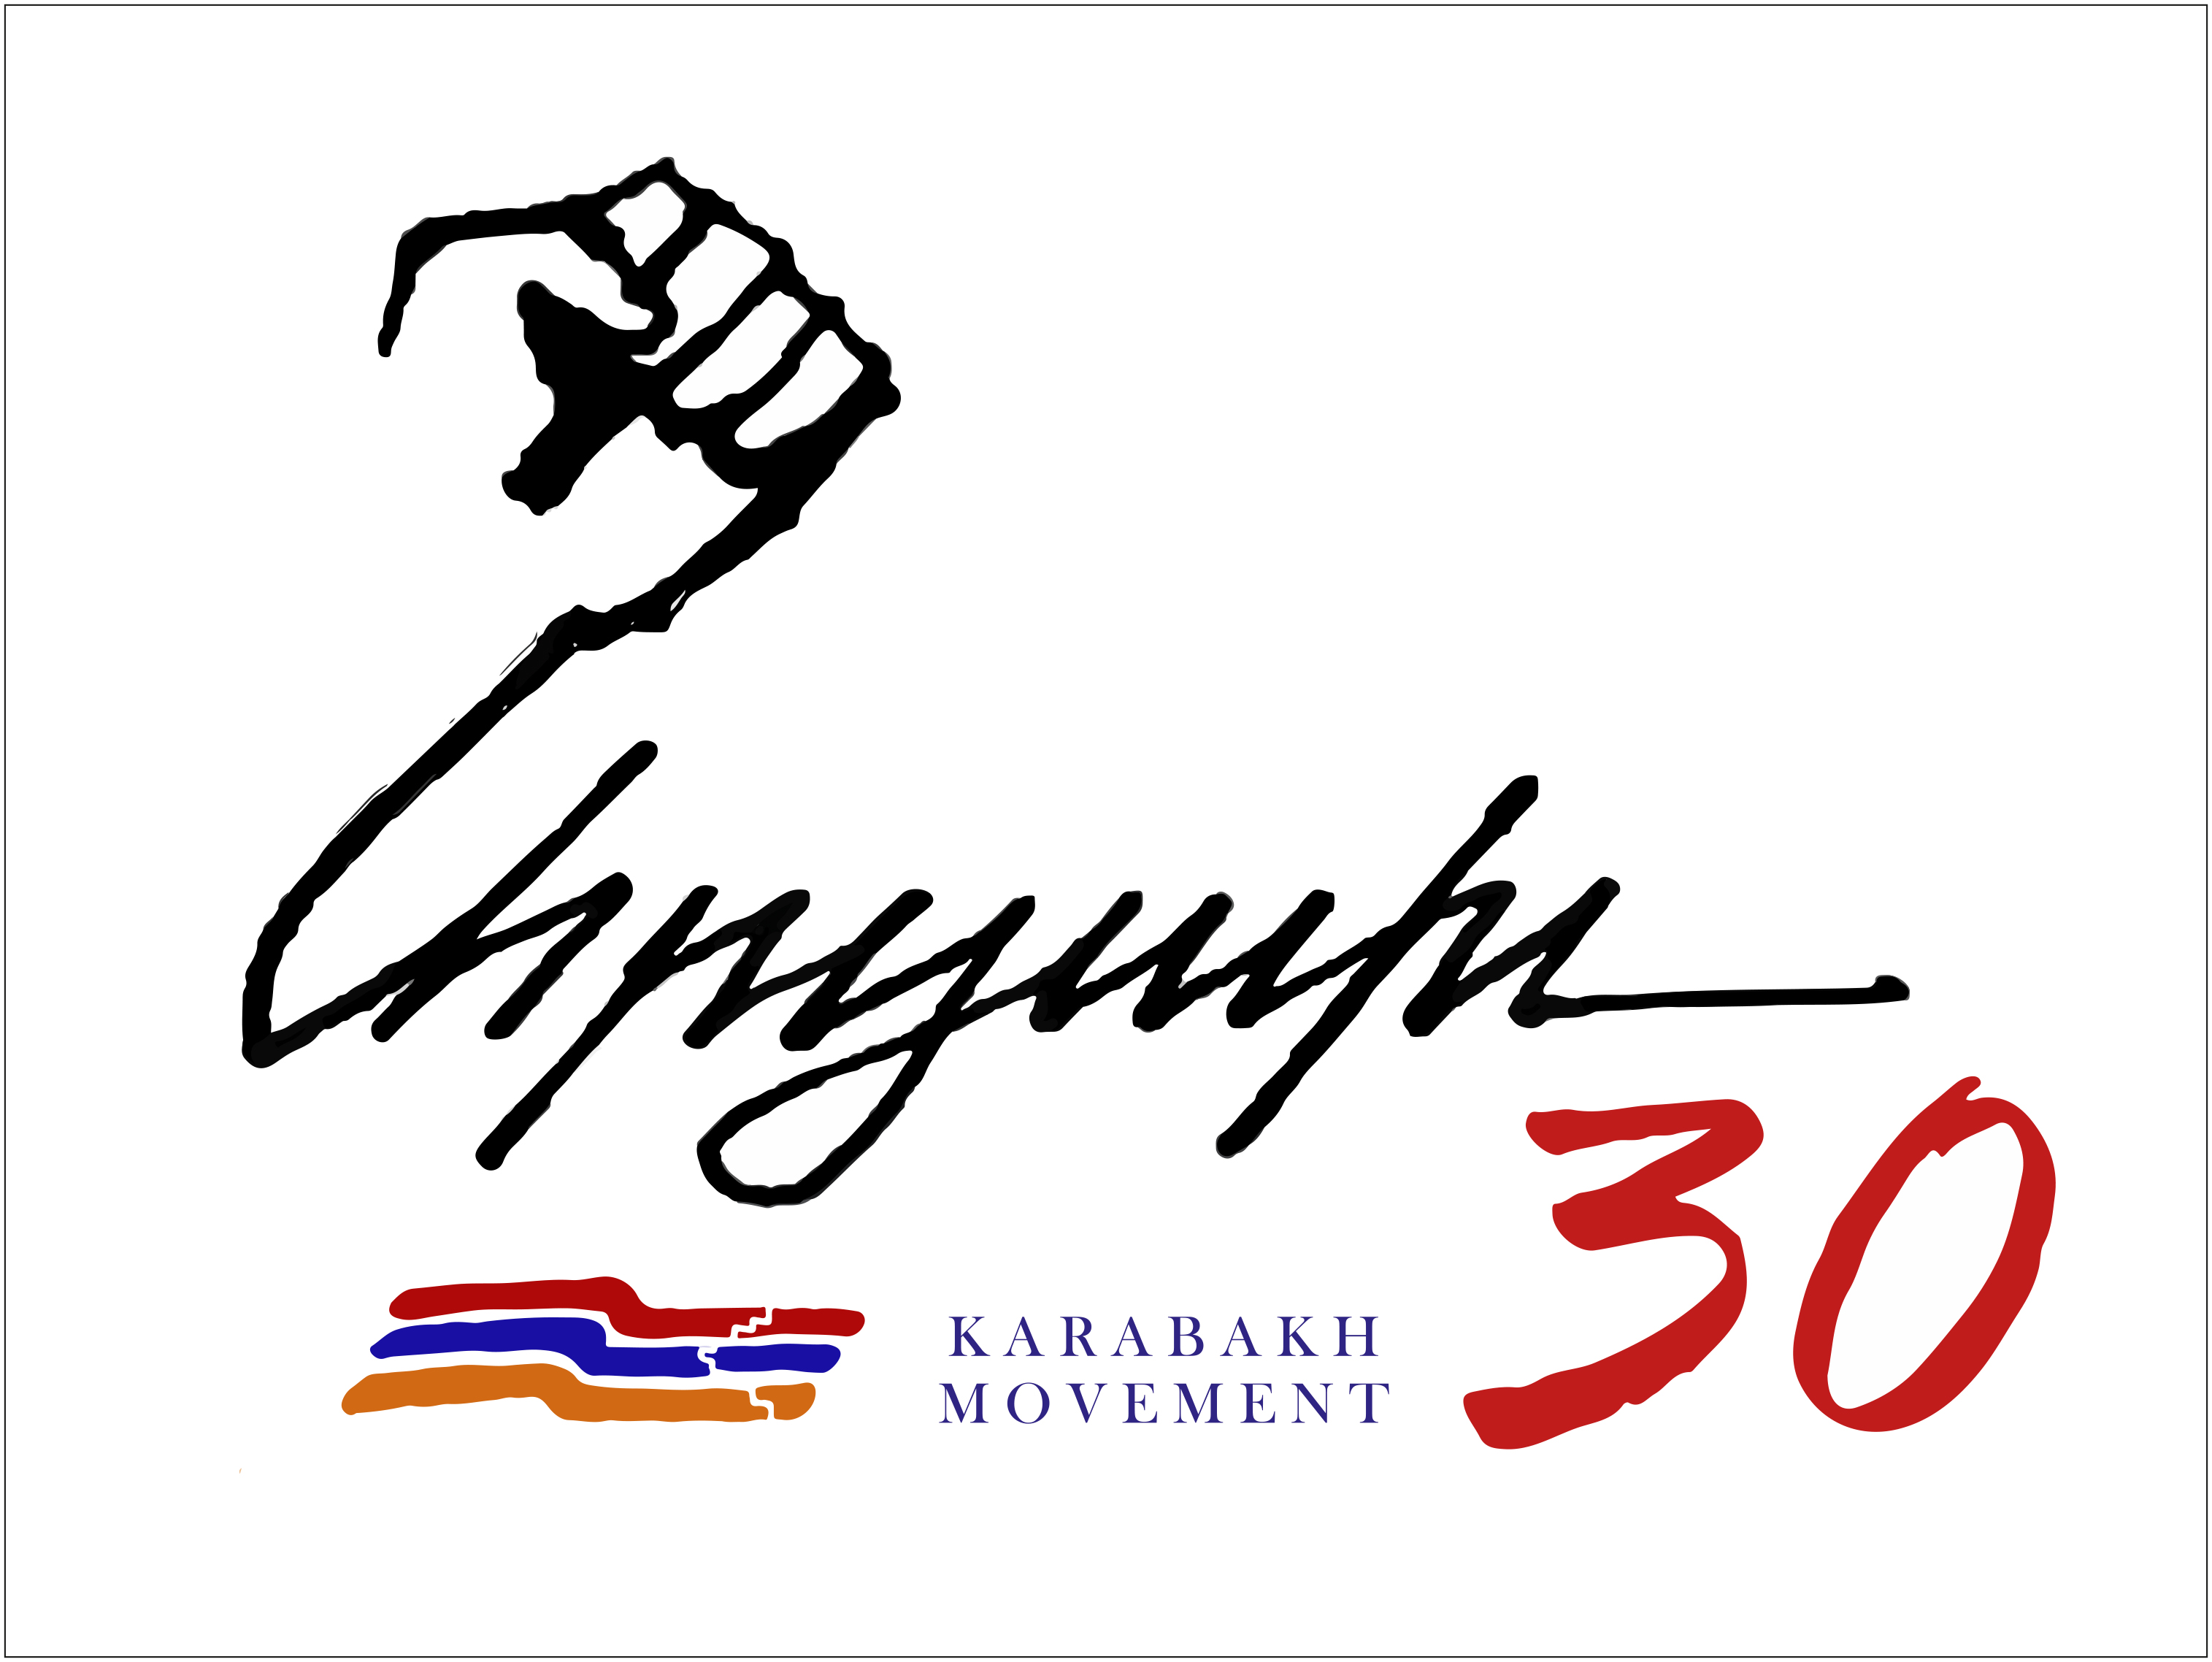 Event dedicated to the 30th anniversary of the Karabakh Liberation Movement held in New York